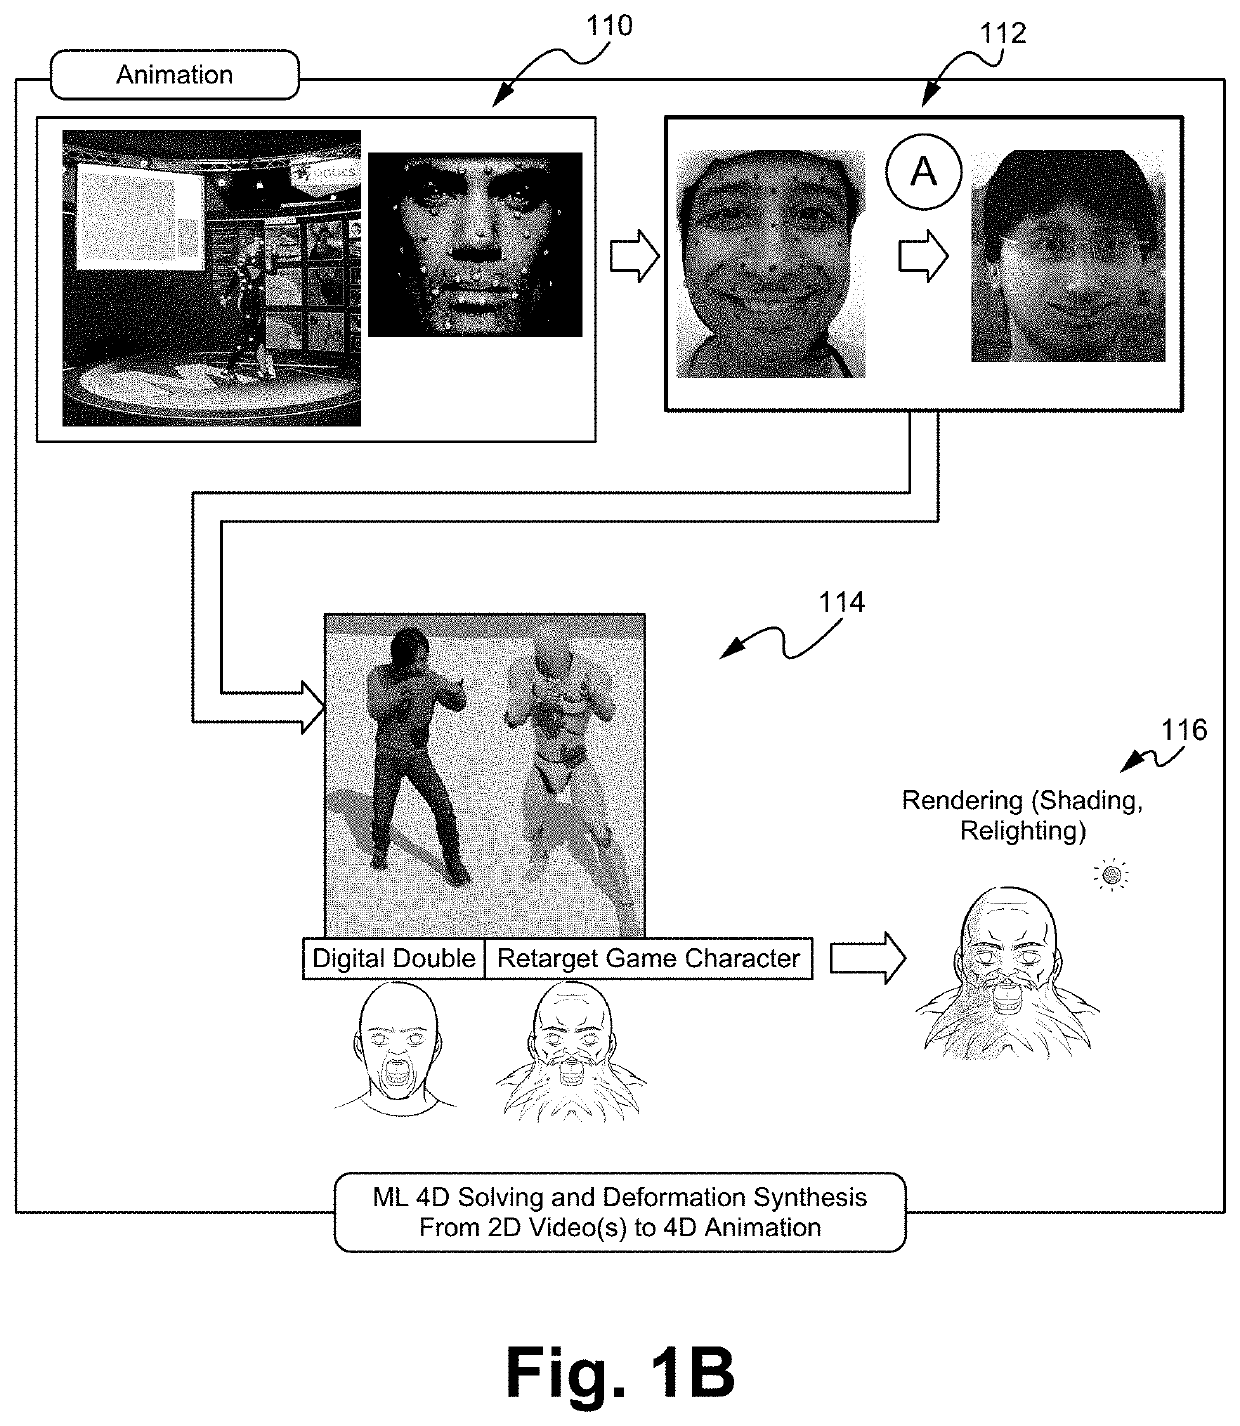 Volumetric capture and mesh-tracking based machine learning 4d face/body deformation training